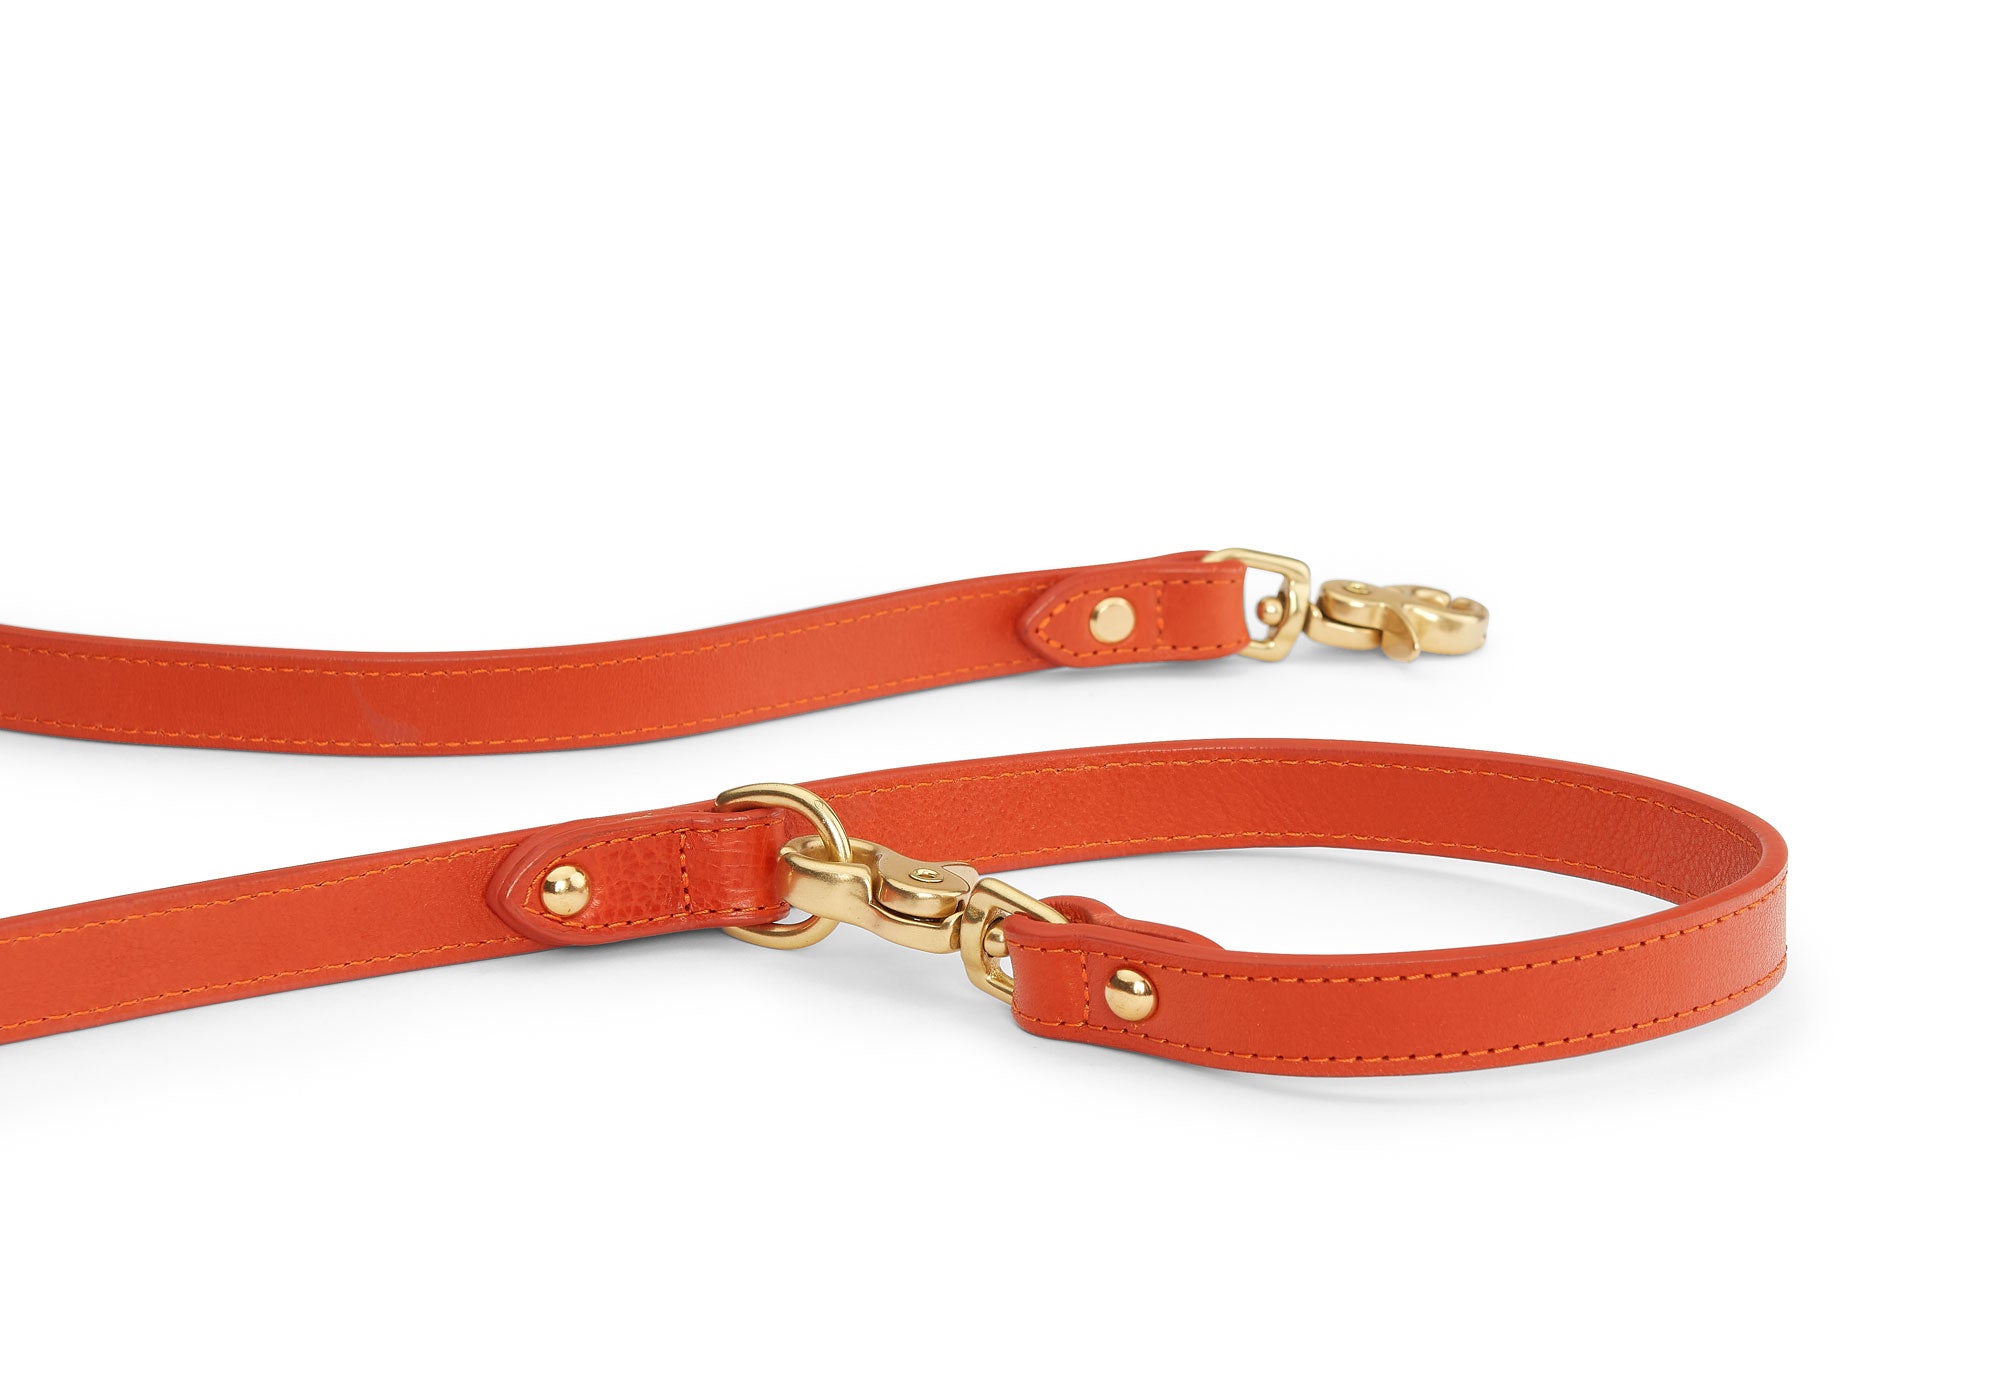 Leashes by Liz Ghost Dog Collar - Orange and